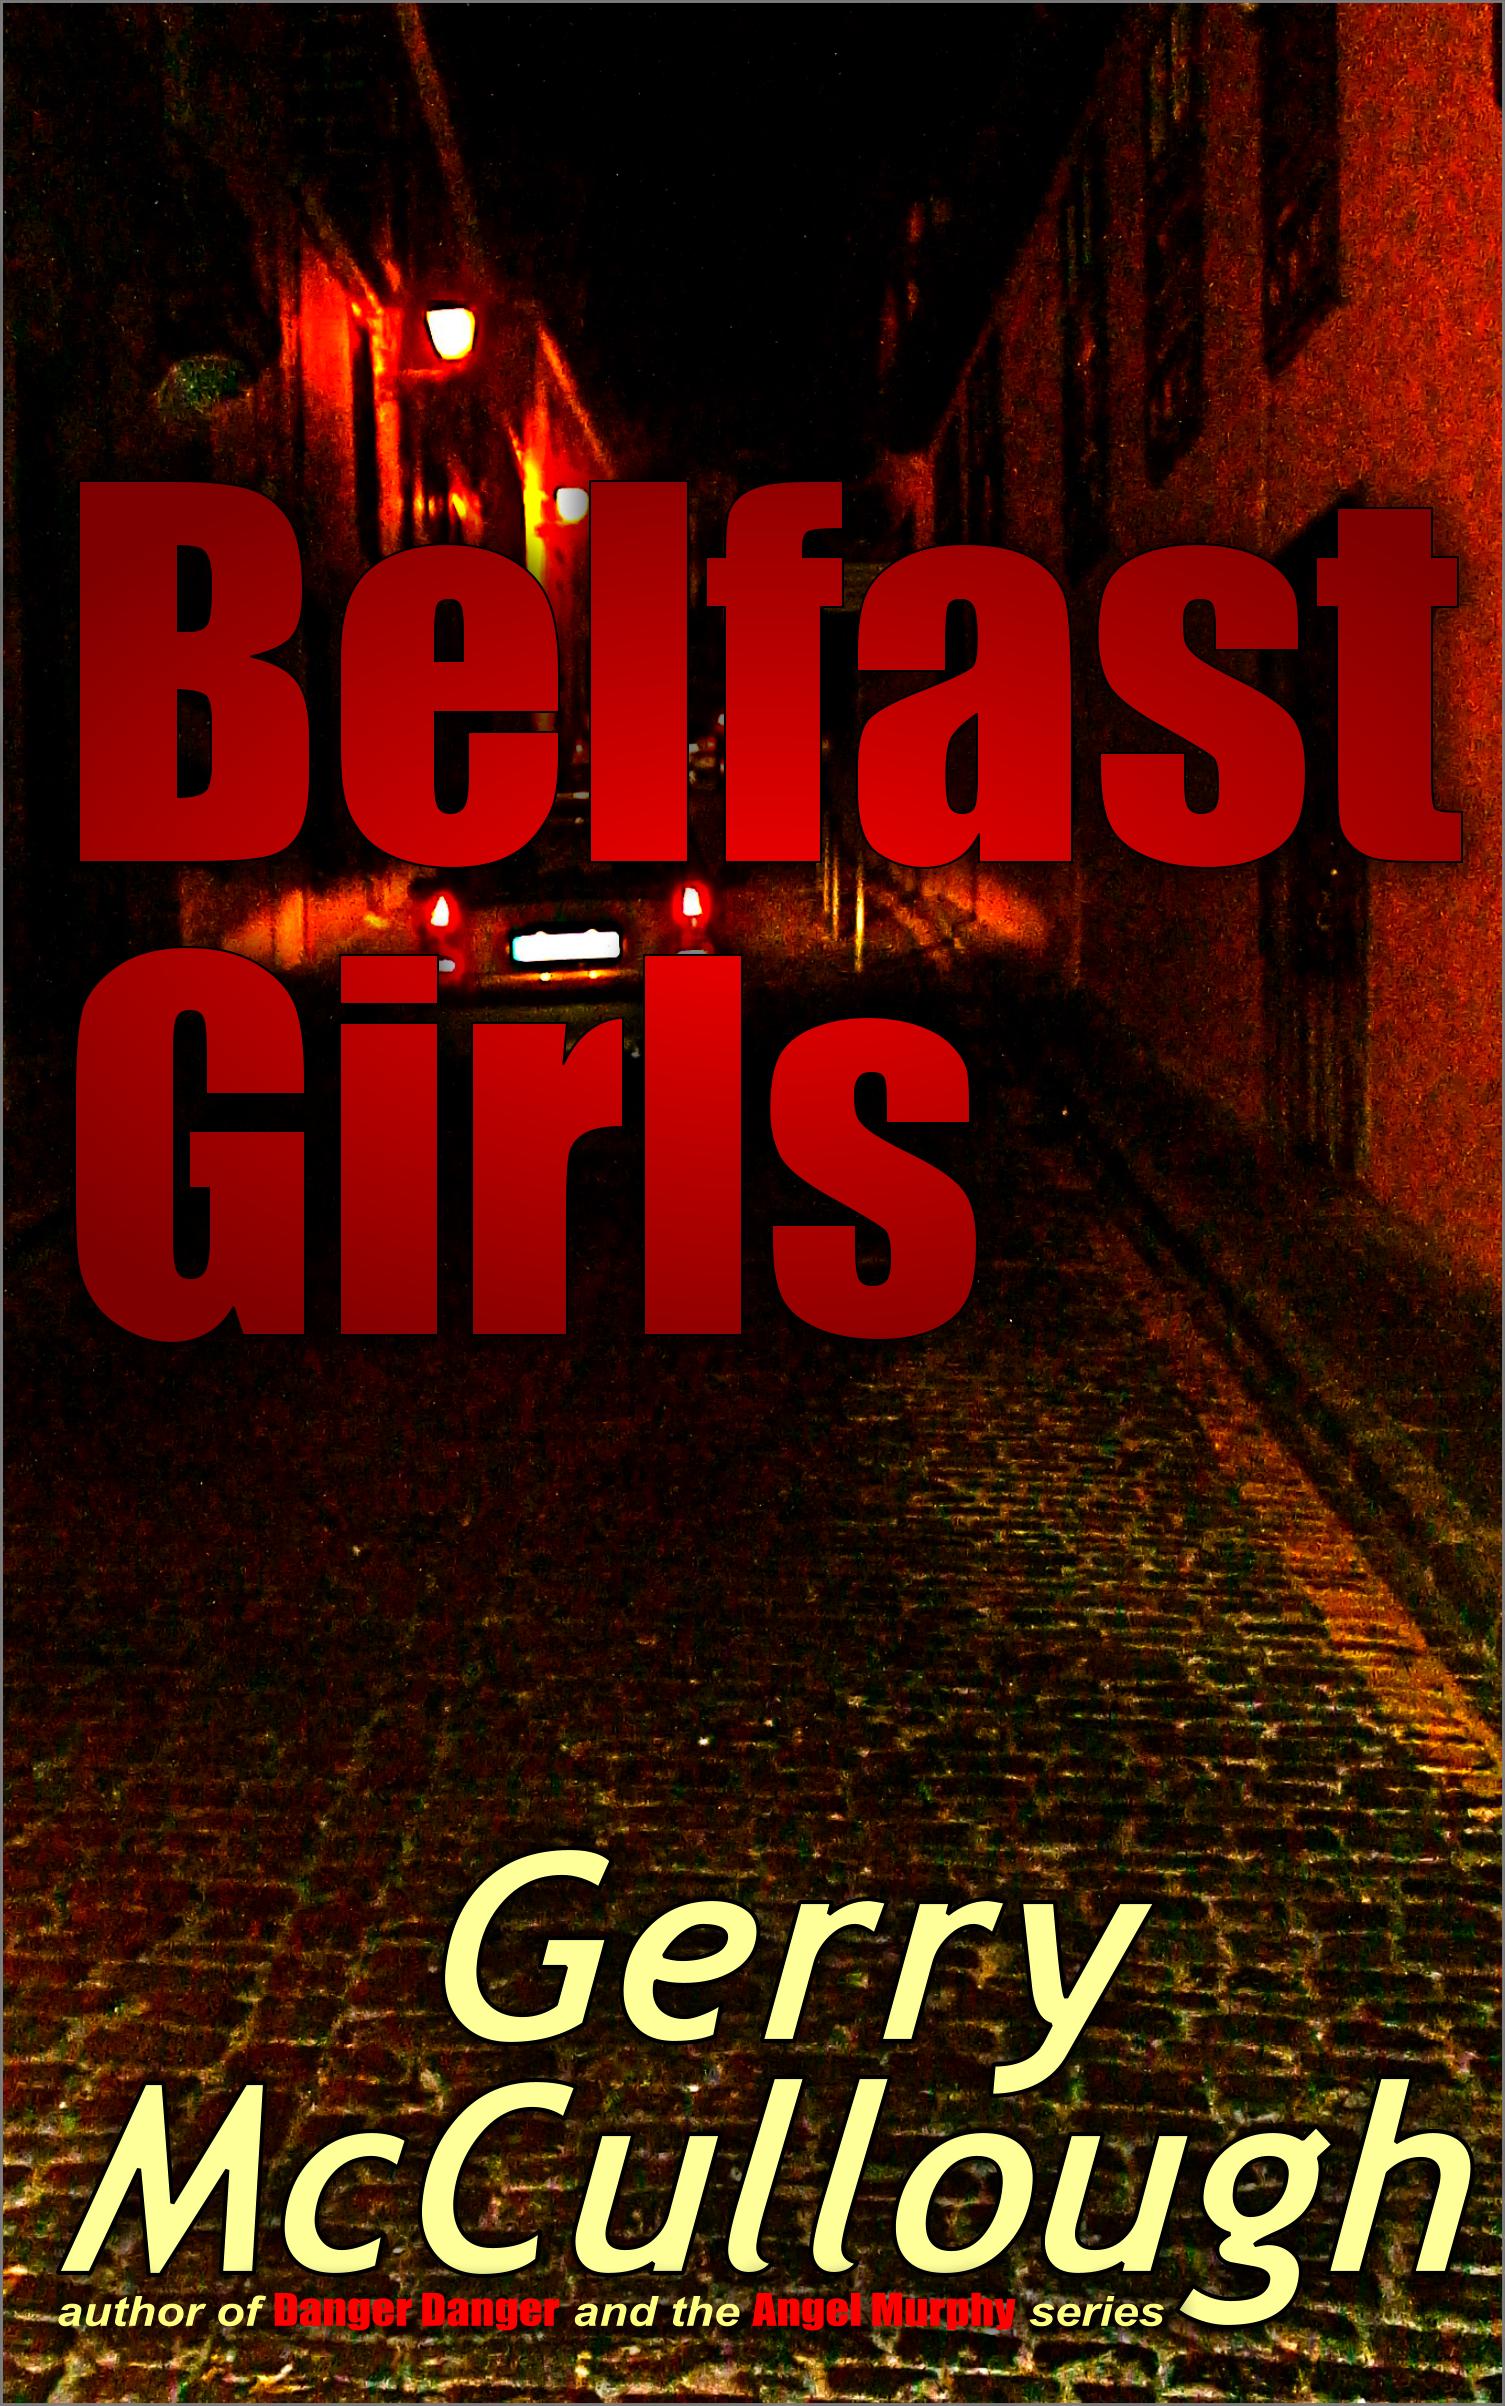 More about 'Belfast Girls'